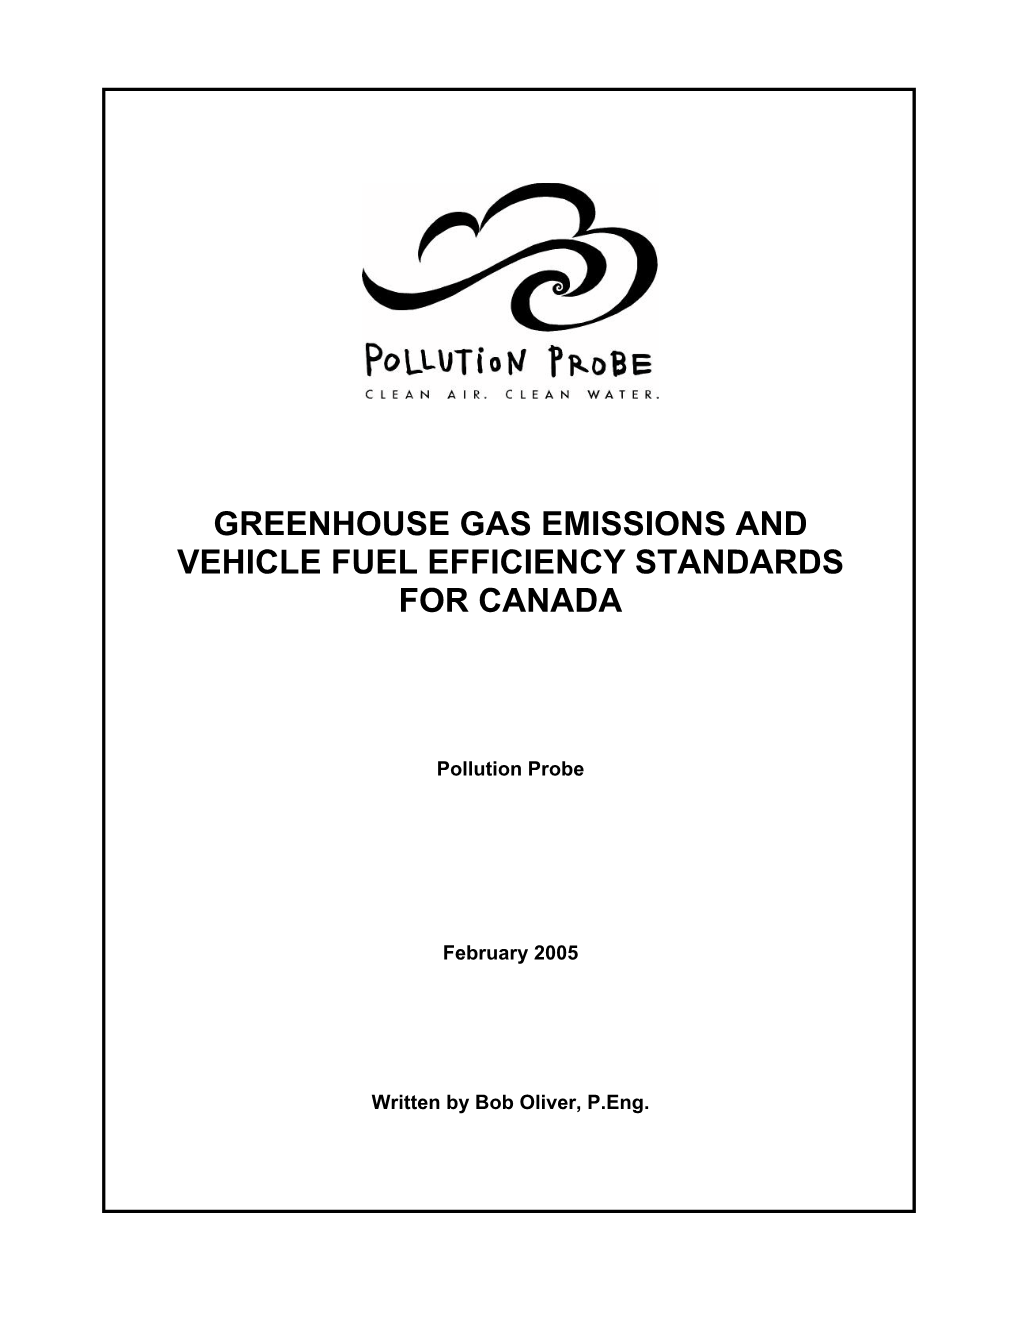 Greenhouse Gas Emissions and Vehicle Fuel Efficiency Standards for Canada